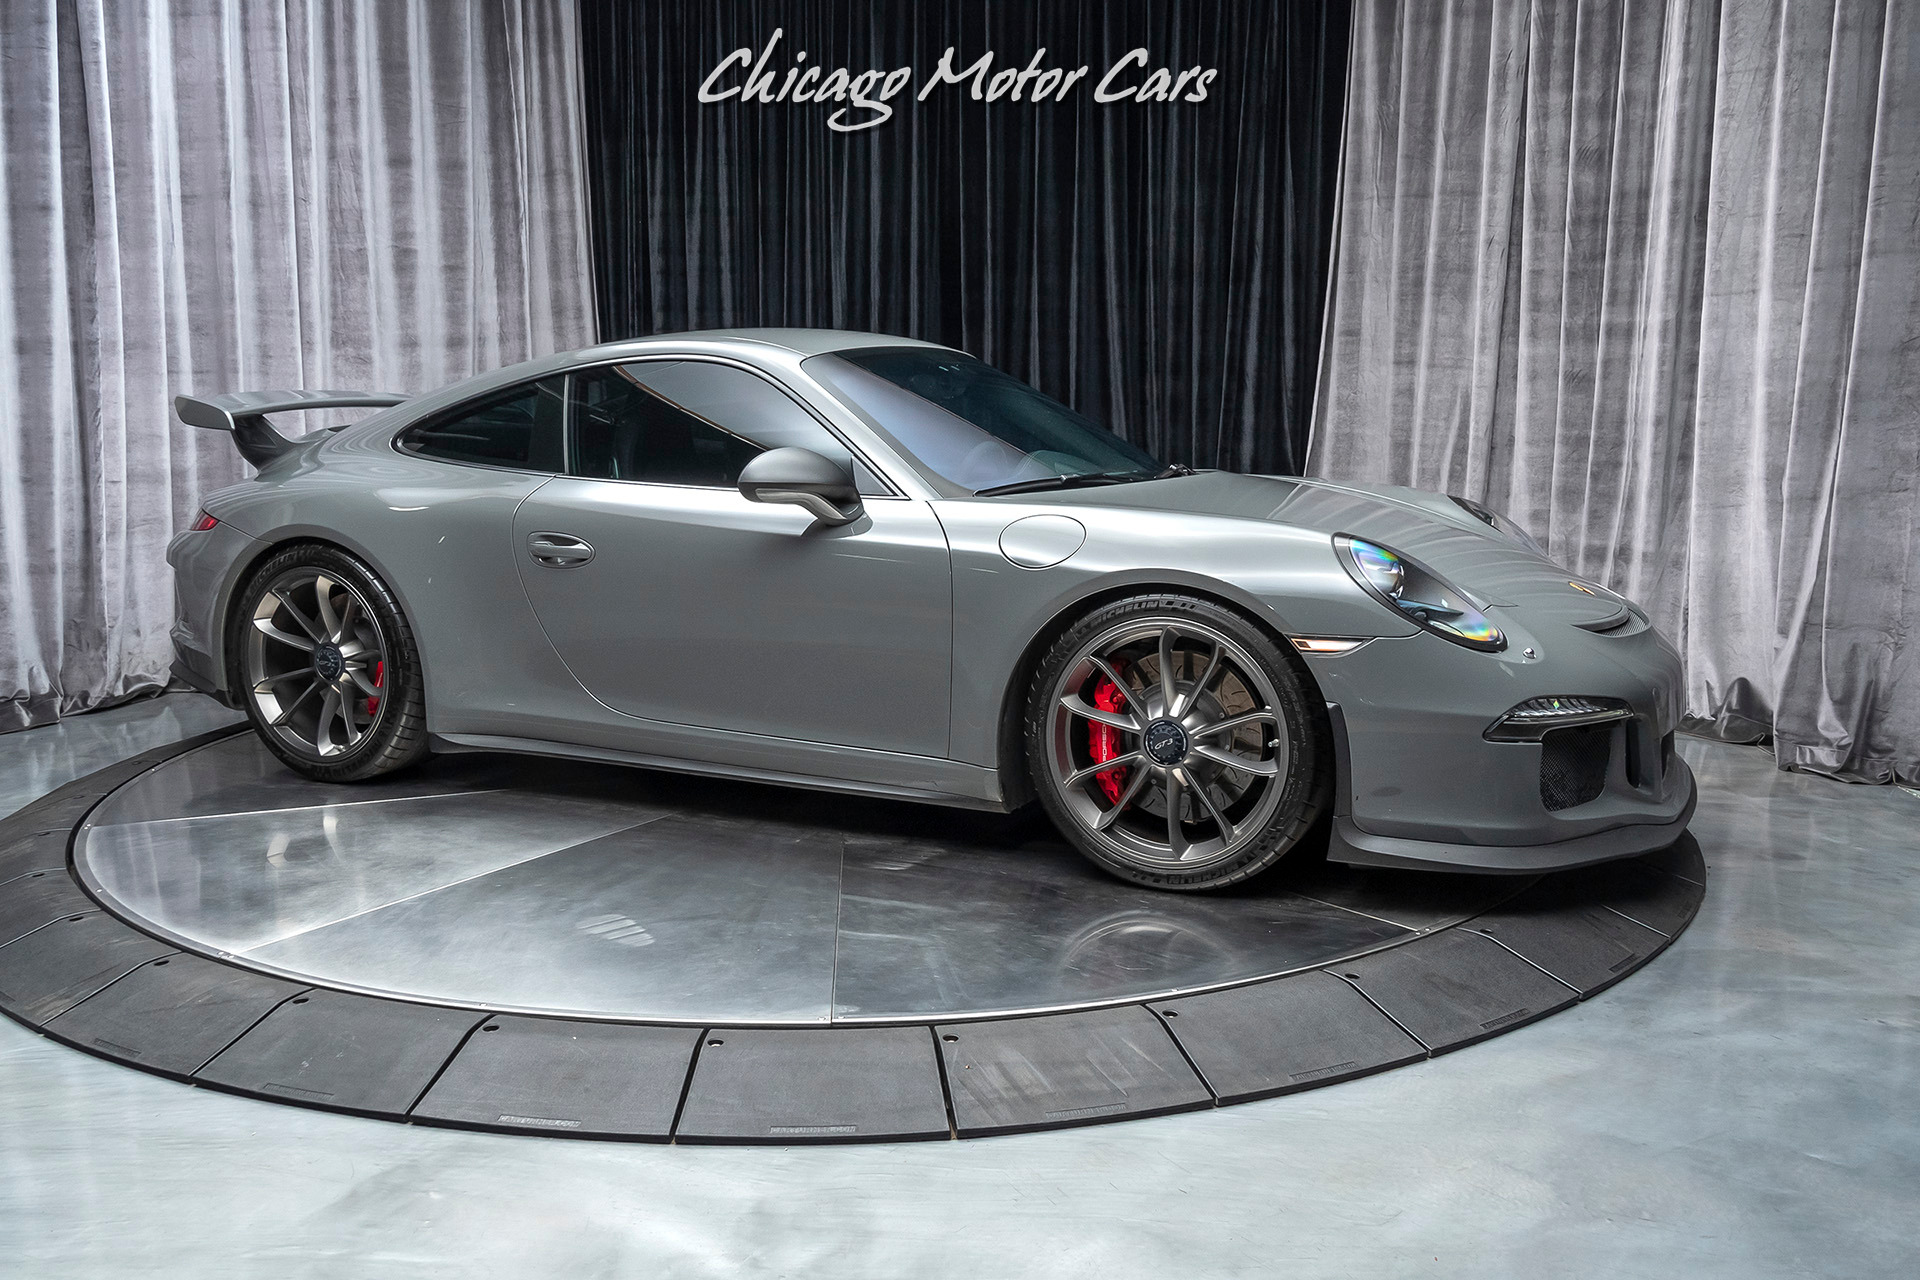 Used-2015-Porsche-911-GT3-Coupe-18-Way-ADAPTIVE-SPORT-Seats-GMG-Exhaust-LOADED-Nardo-Wrap